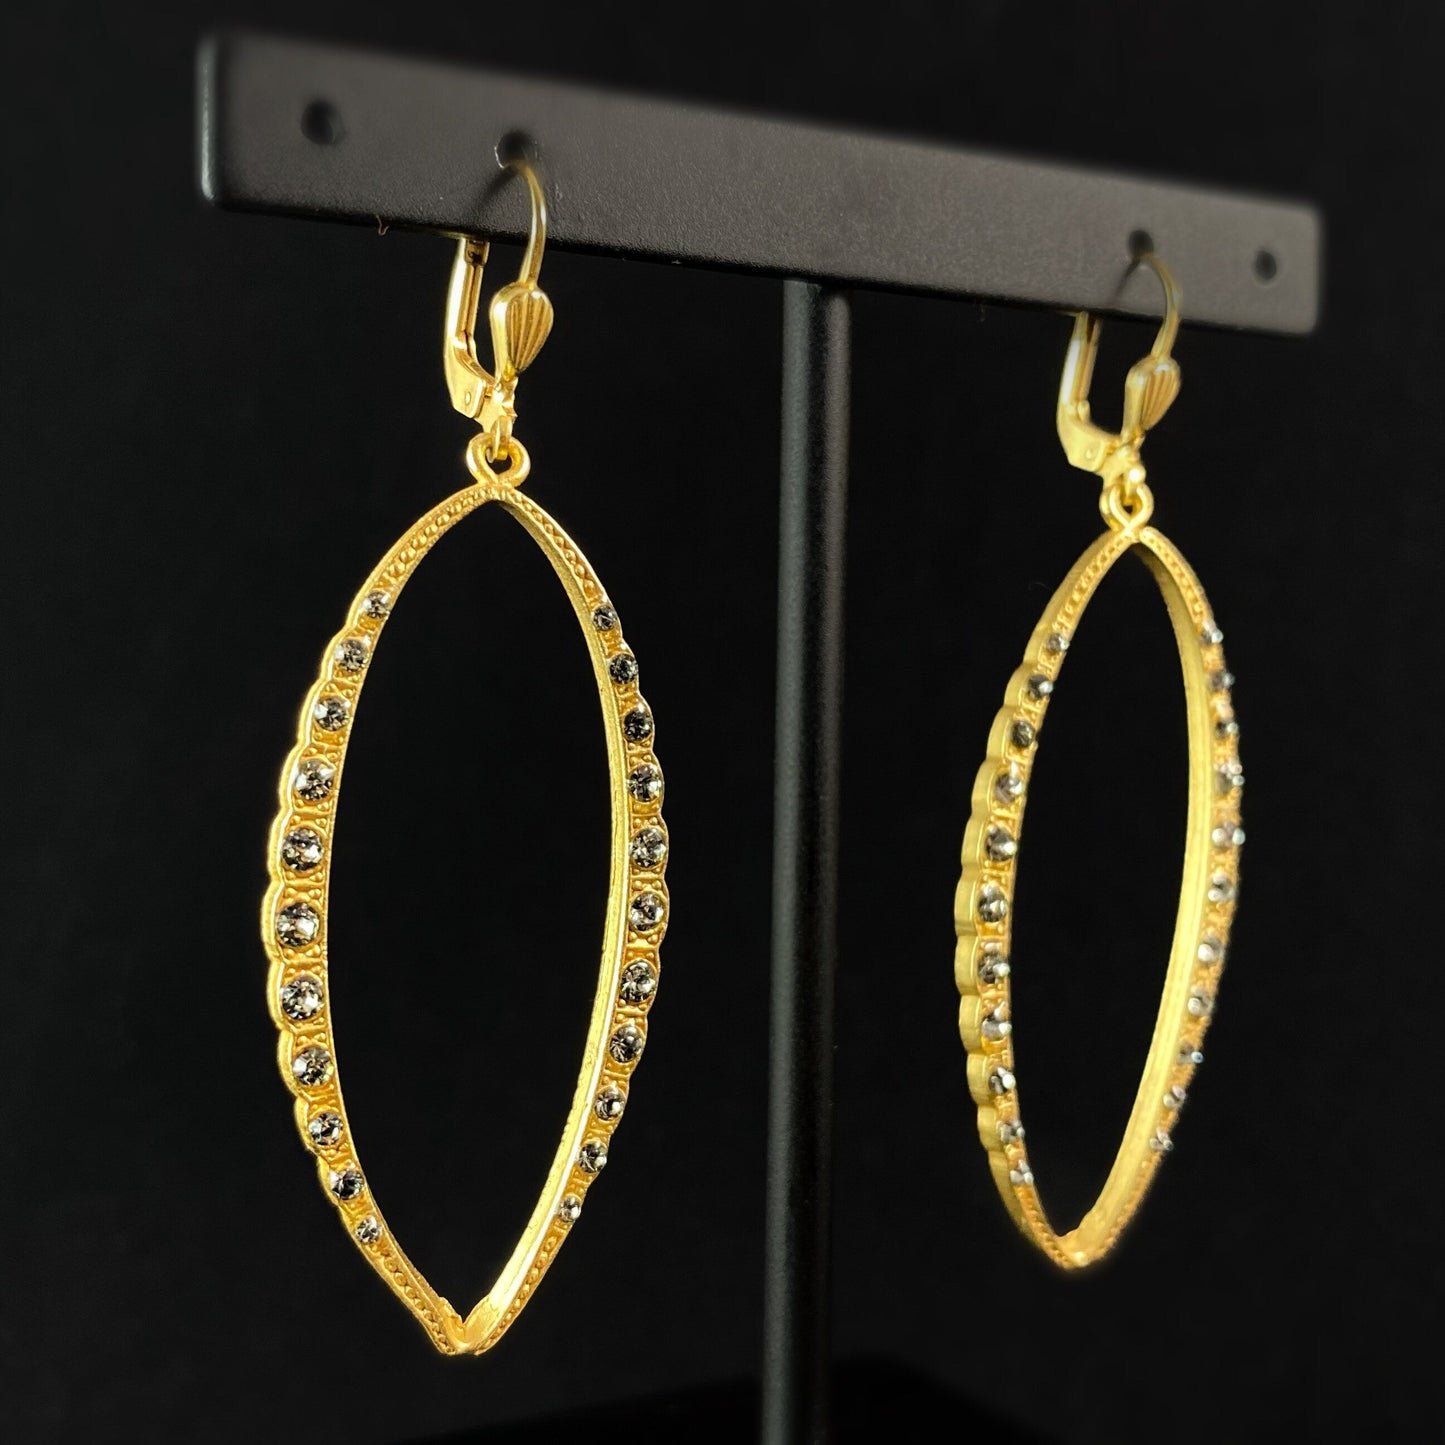 Oval Gold Drop Earrings with Clear Swarovski Crystals - La Vie Parisienne by Catherine Popesco